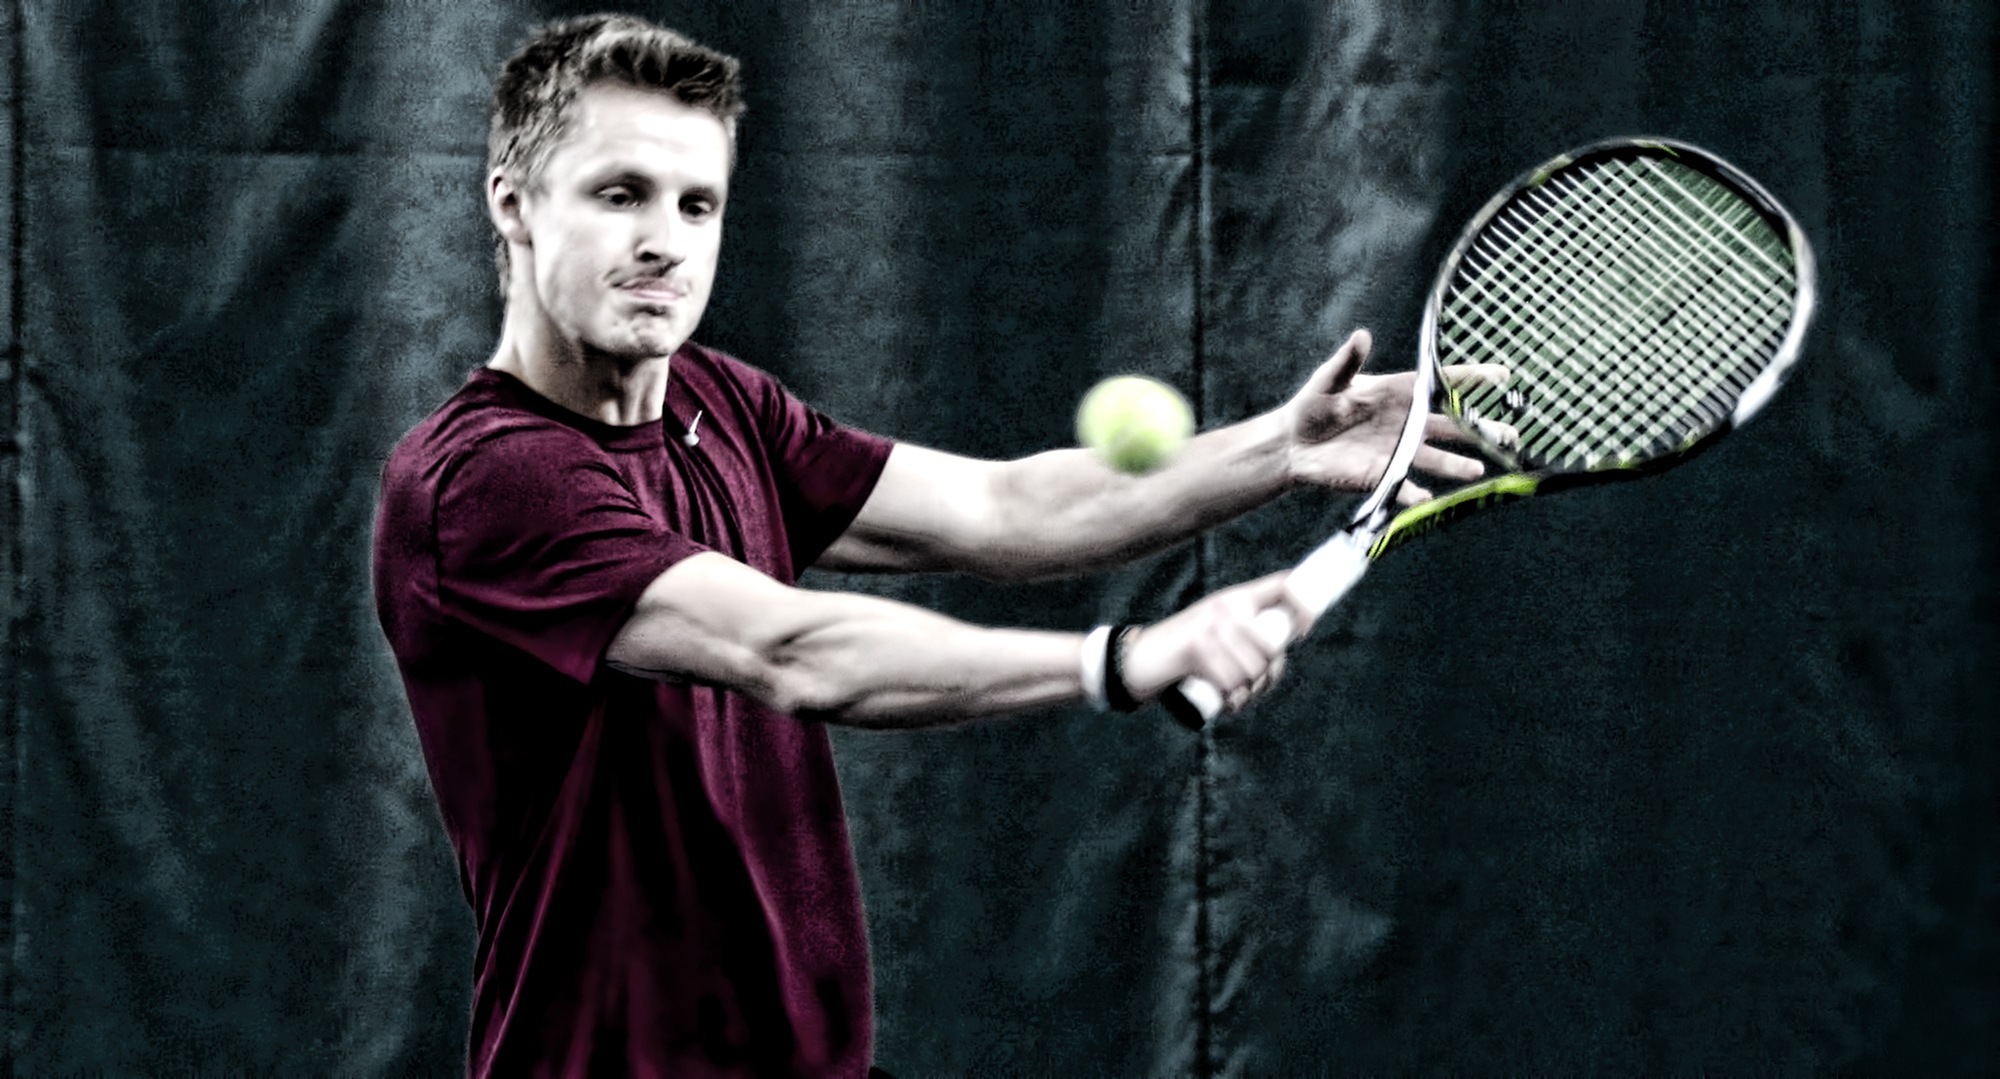 Senior Matthew Engum concentrates on a backhand slice during his 5-7, 6-2, 10-3 win at No.5 singles in the Cobbers' 9-0 win over St. Mary's.